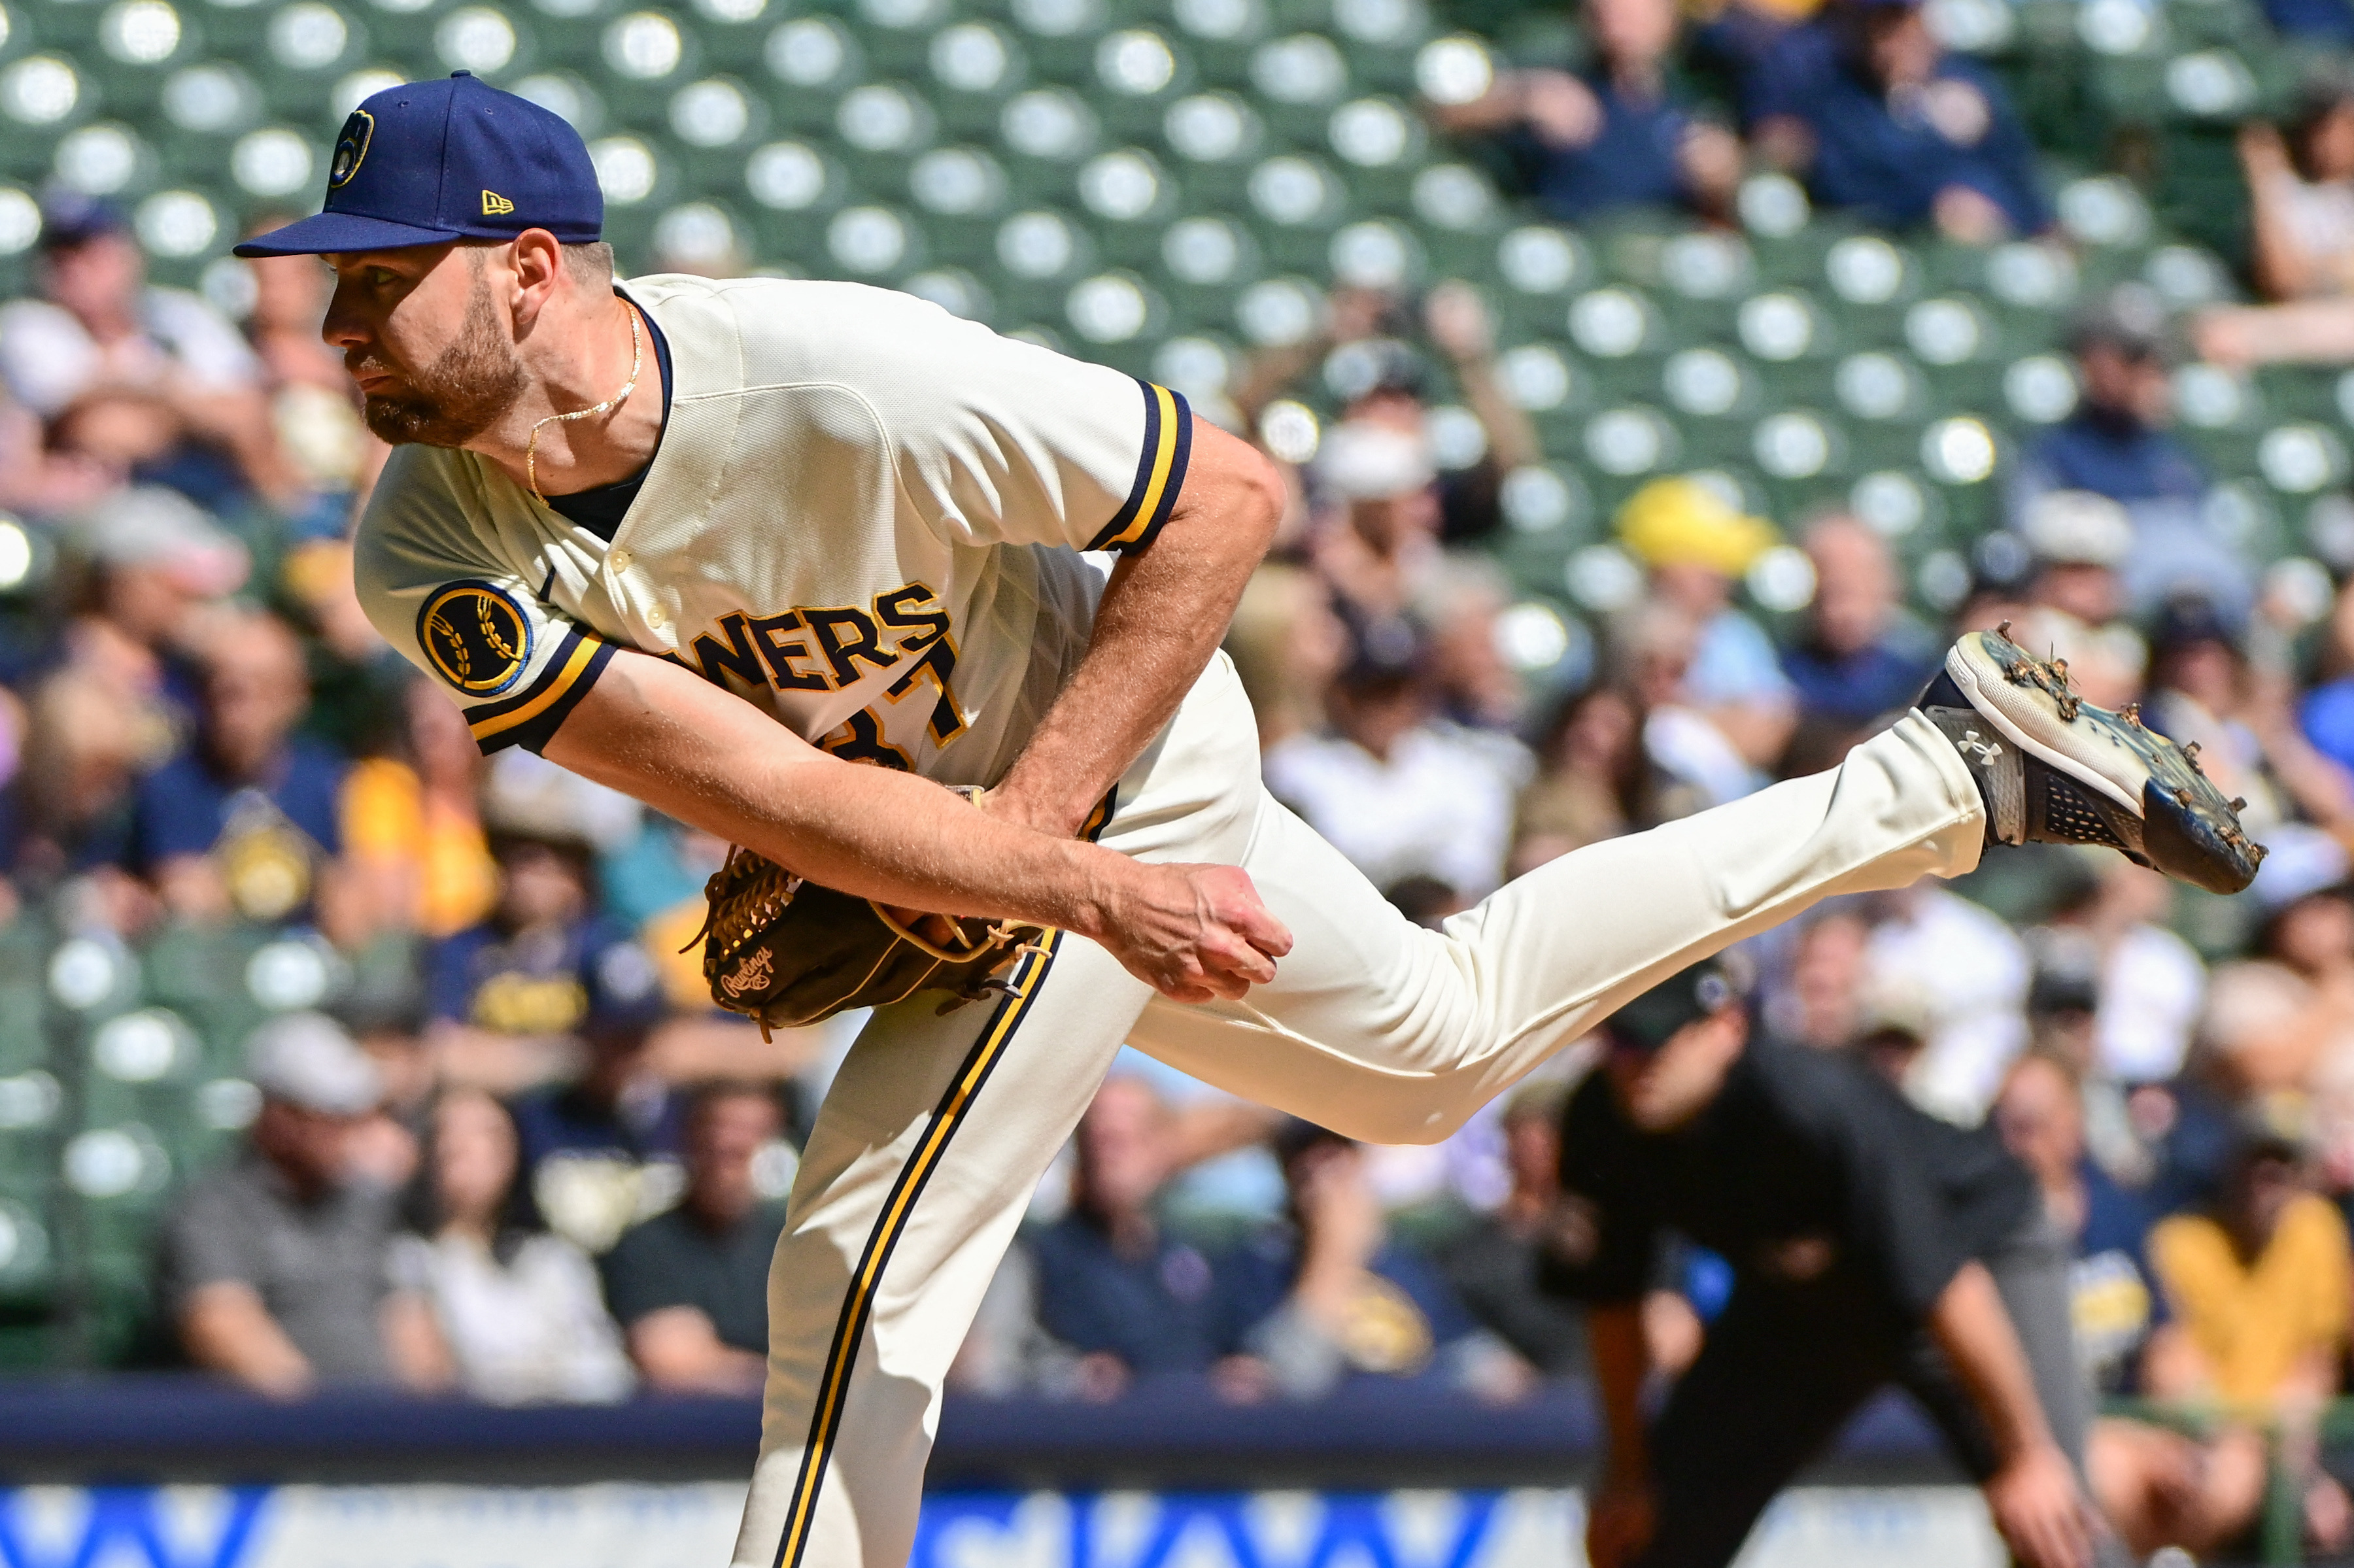 Tyrone Taylor, relievers power Brewers past Marlins